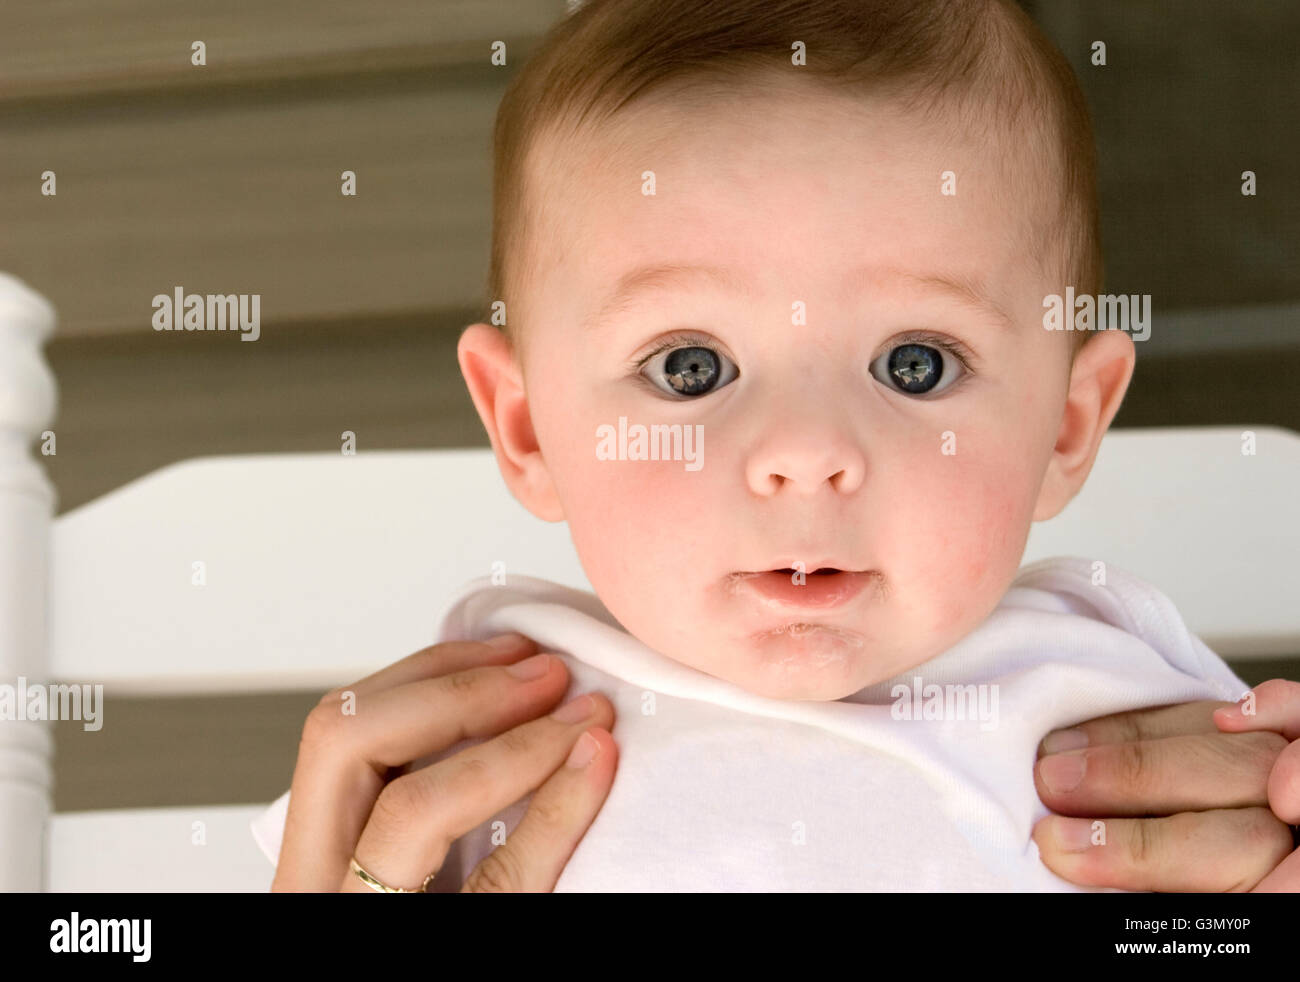 5-month old baby boy being held up by his mother Stock Photo